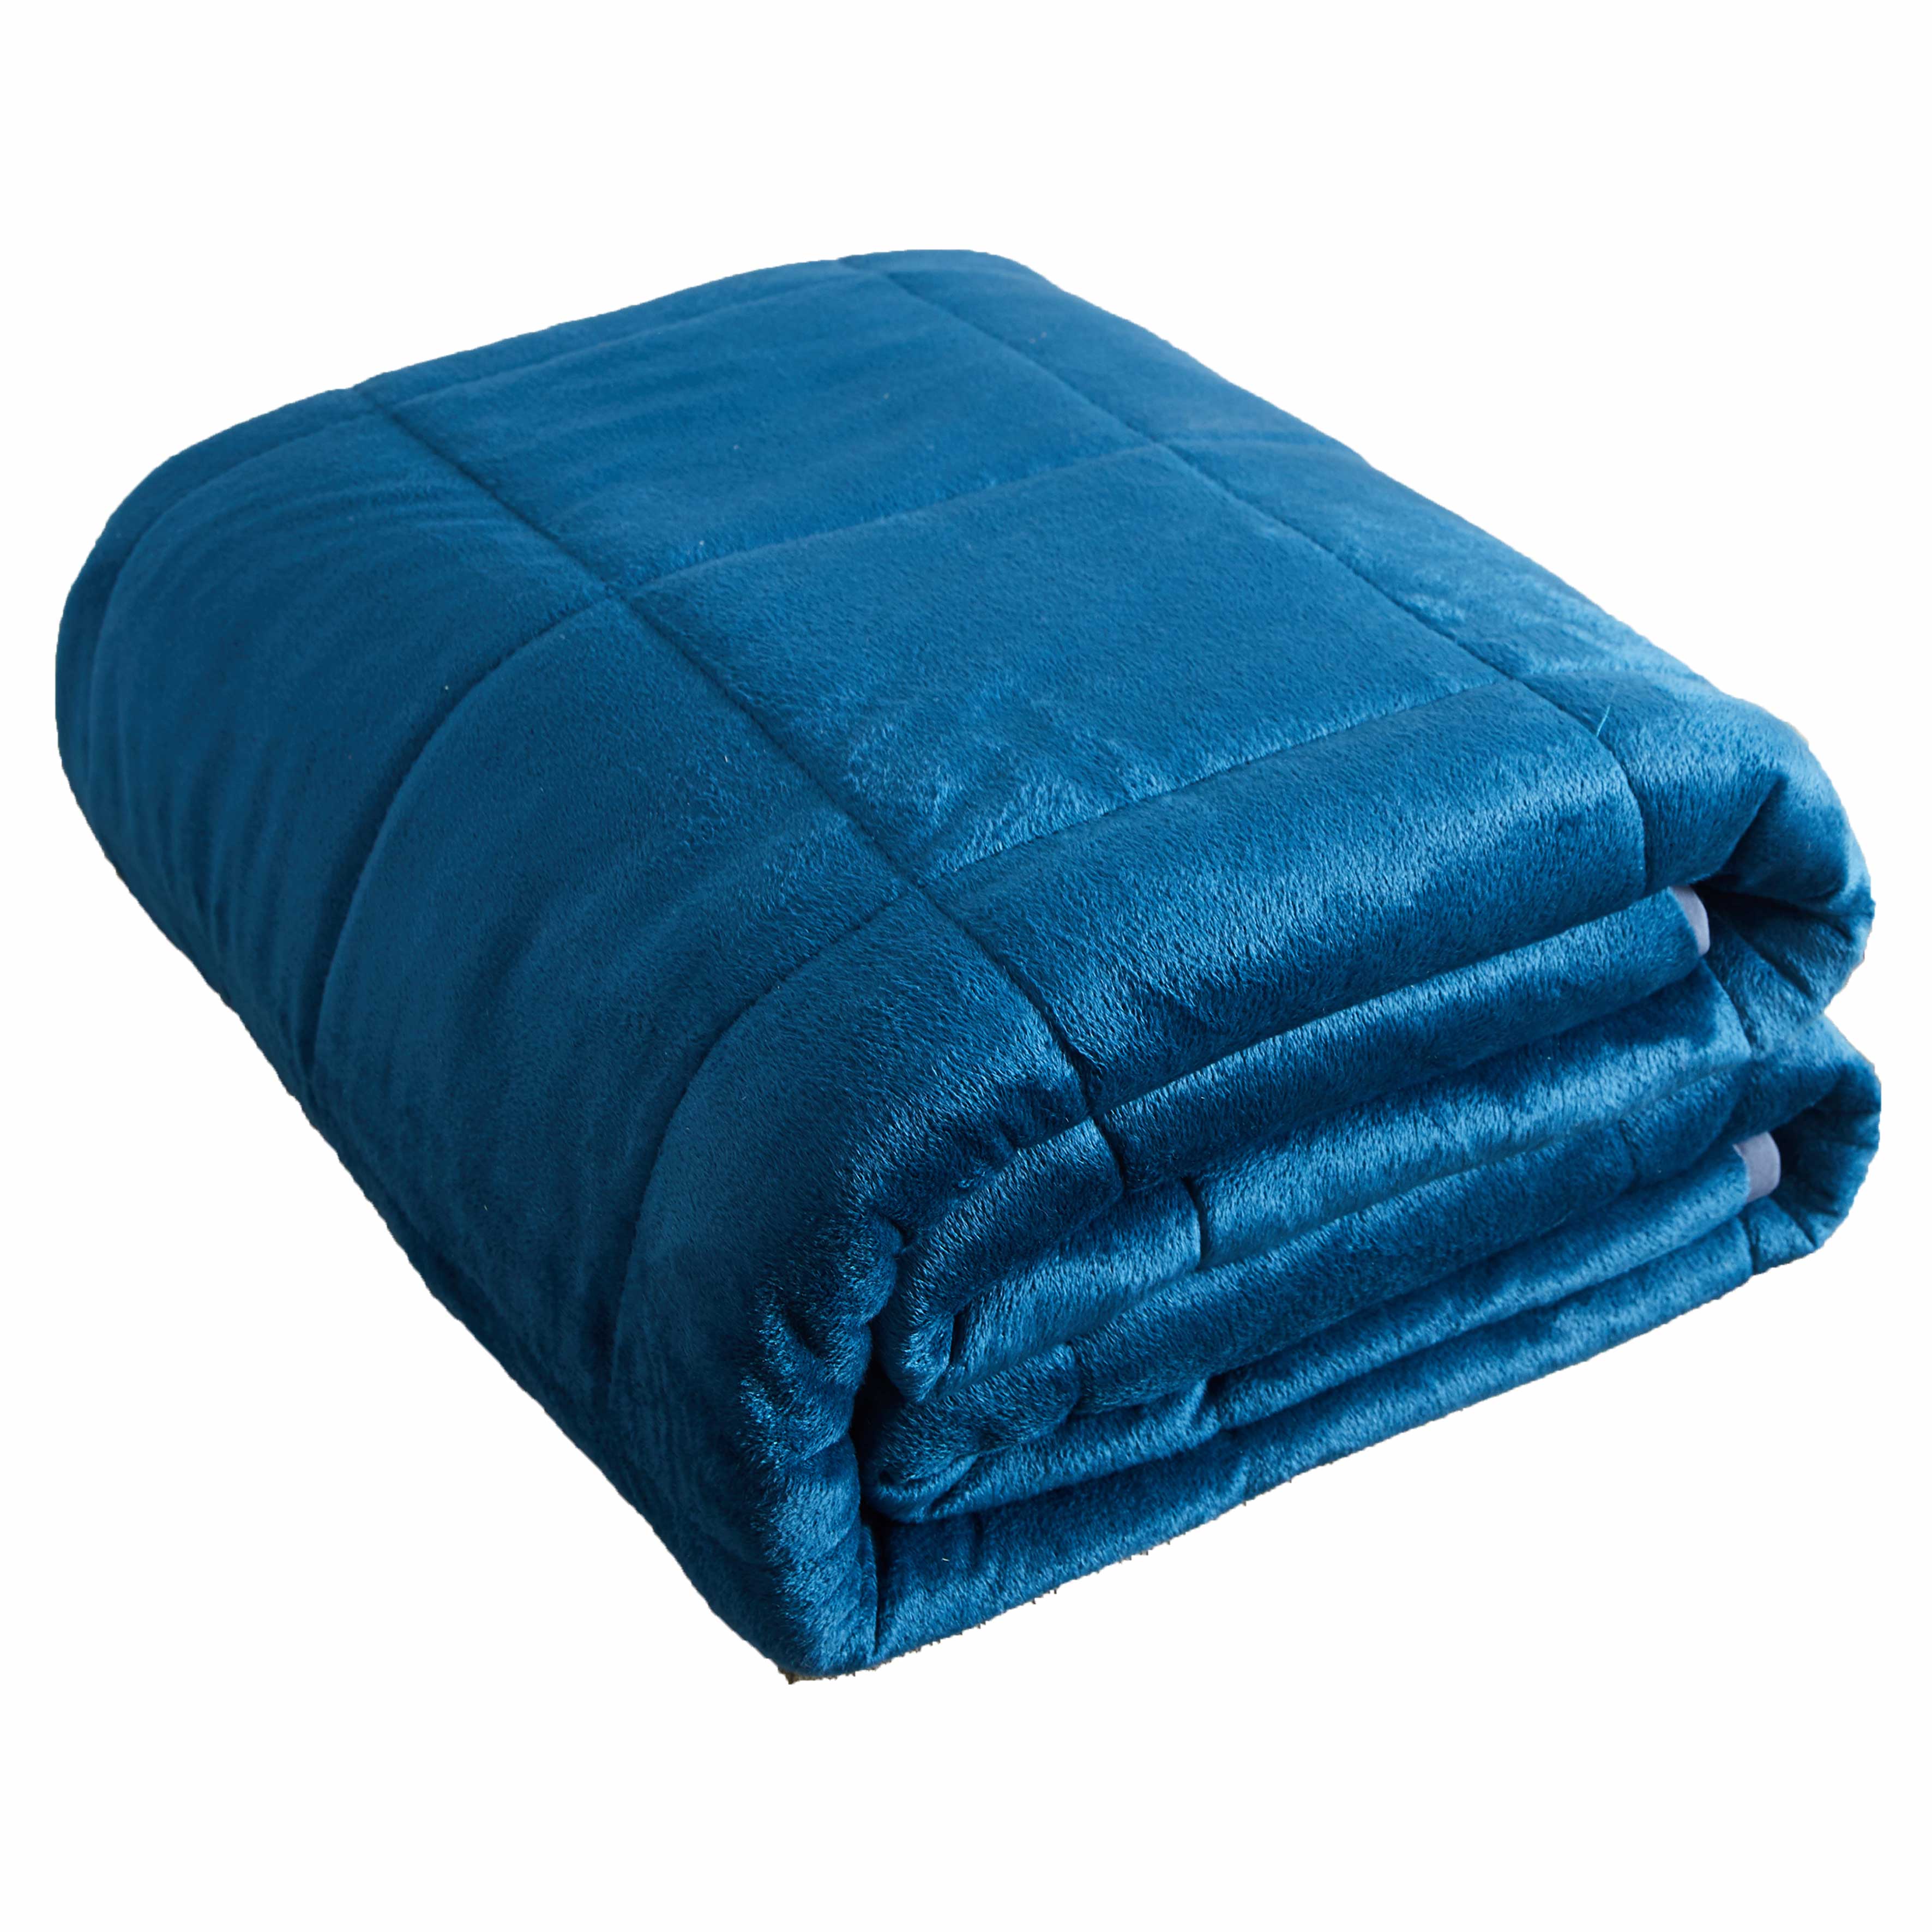 Plush Mink Weighted Blanket, 15 & 20 lb